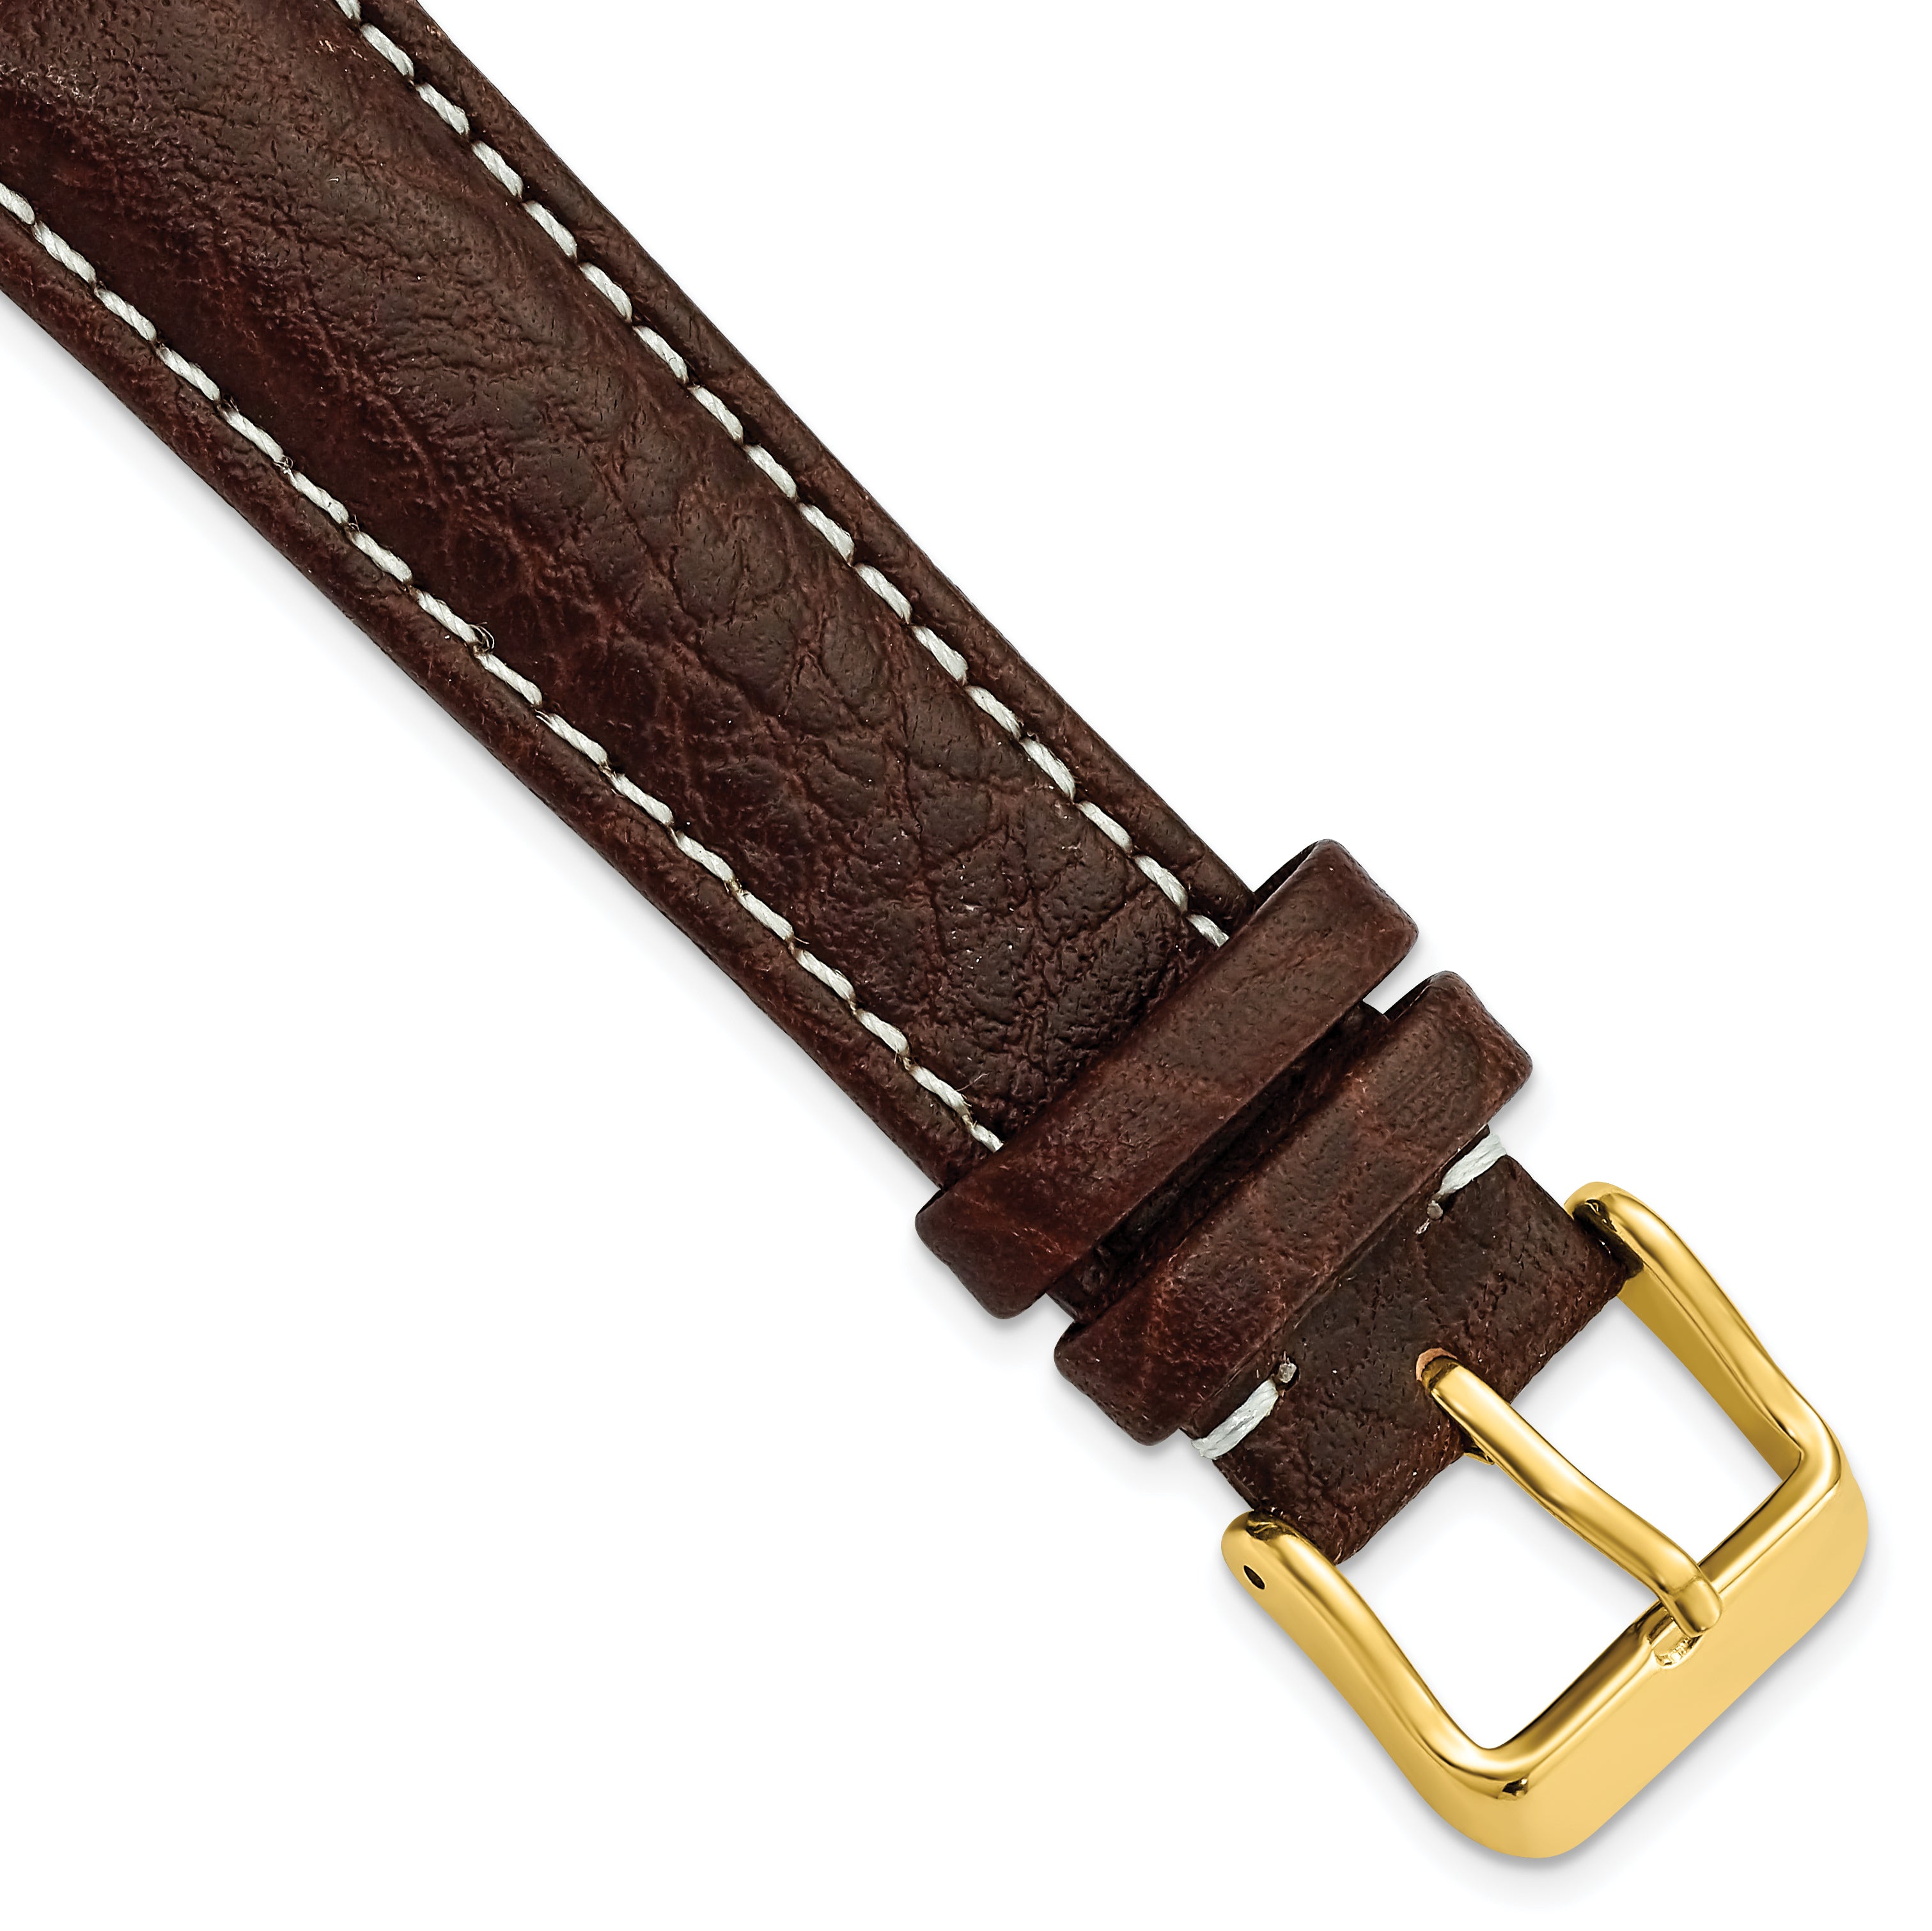 DeBeer 19mm Dark Brown Sport Leather with White Stitching and Gold-tone Buckle 7.5 inch Watch Band